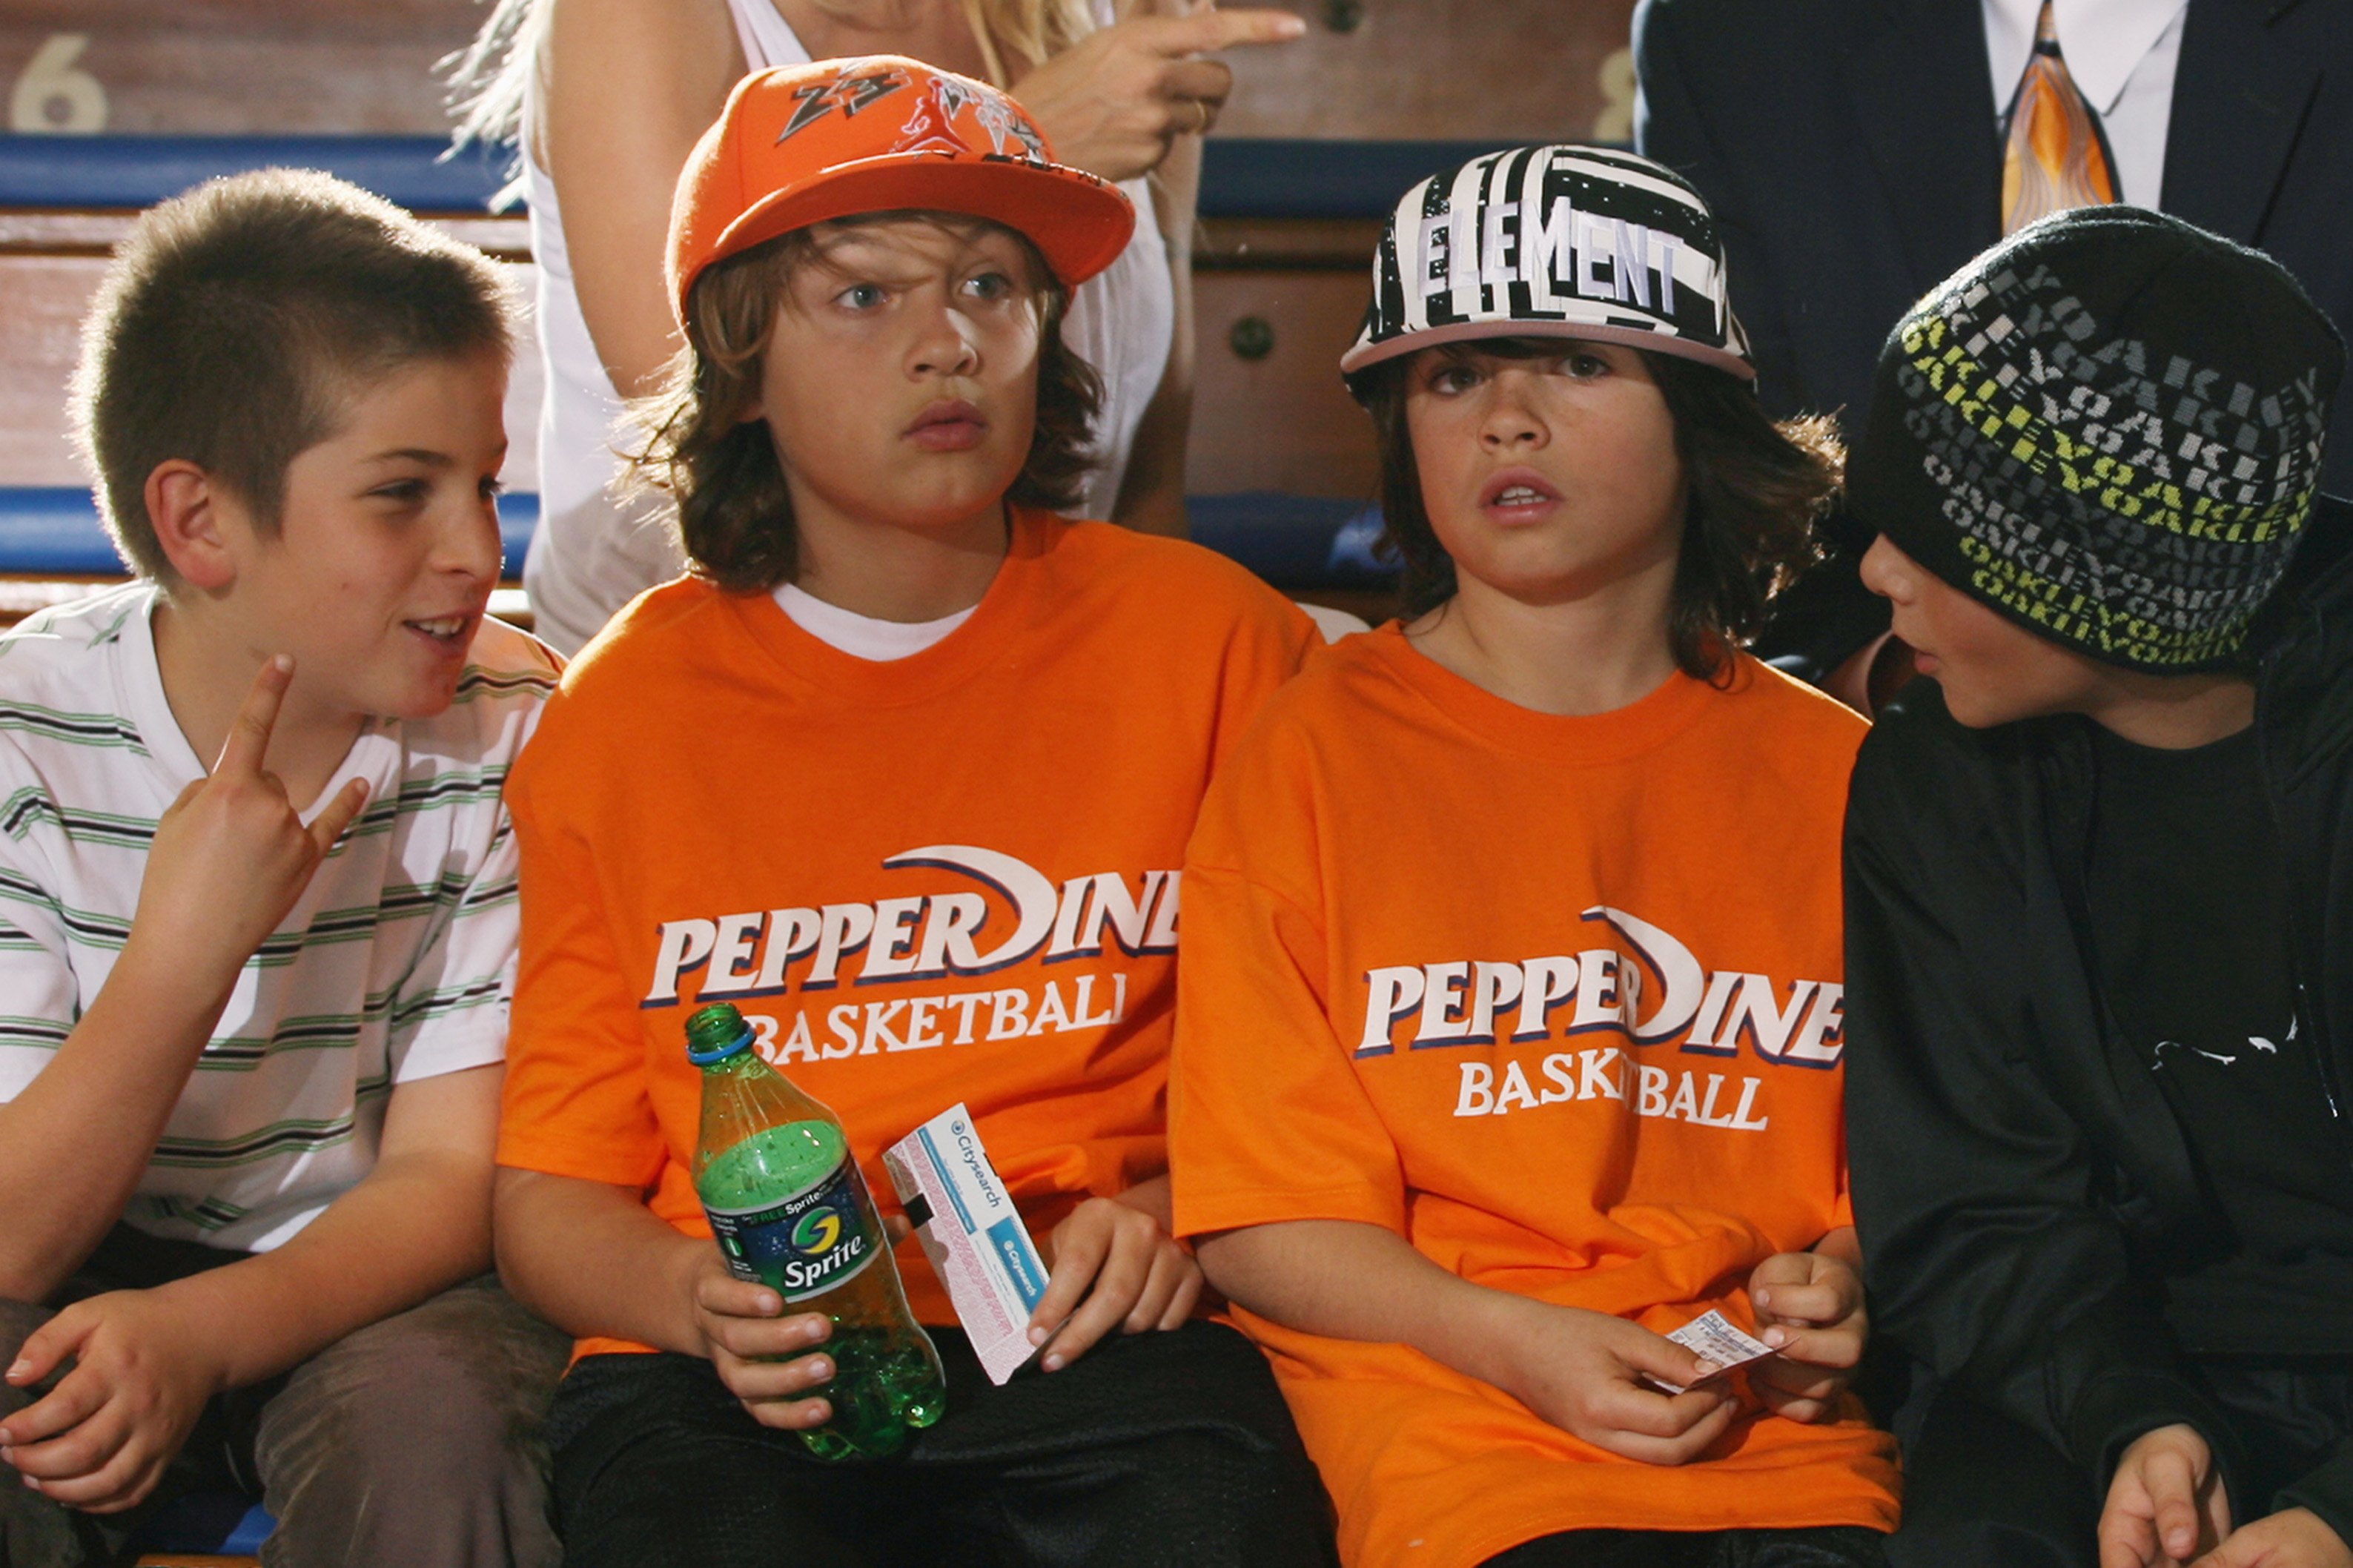 Brandon Lee (orange cap) and Dylan Lee (striped cap) photographed with friends at a basketball game at Firestone Fieldhouse in Malibu, California on January 26, 2008 | Source: Getty Images